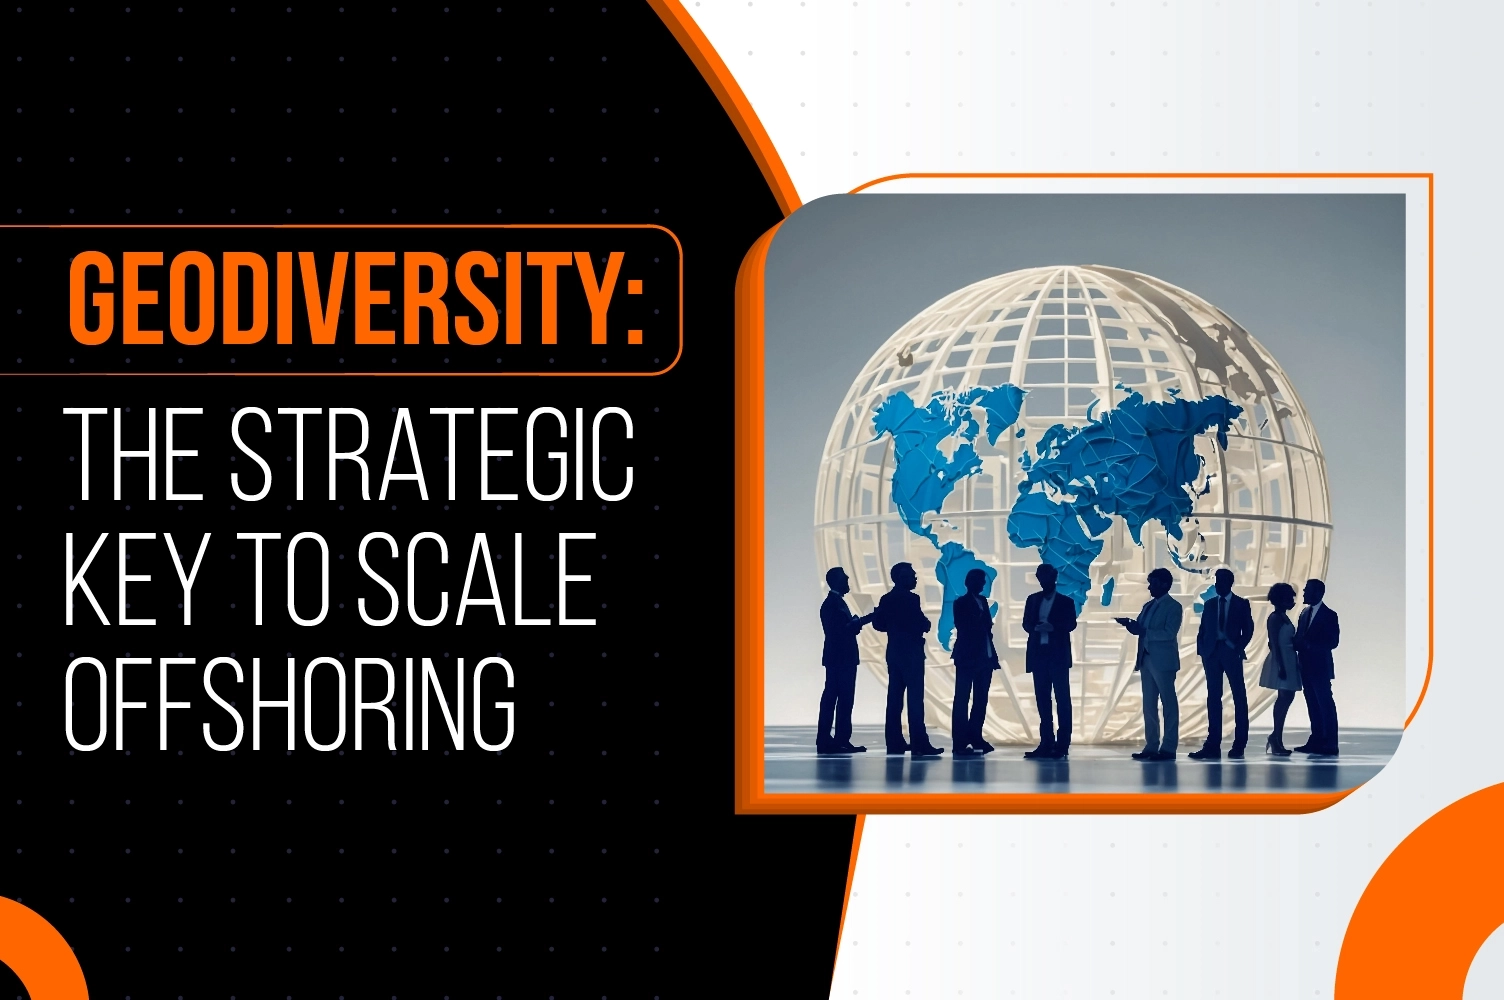 Geodiversity: The Strategic Key to Scale Offshoring 